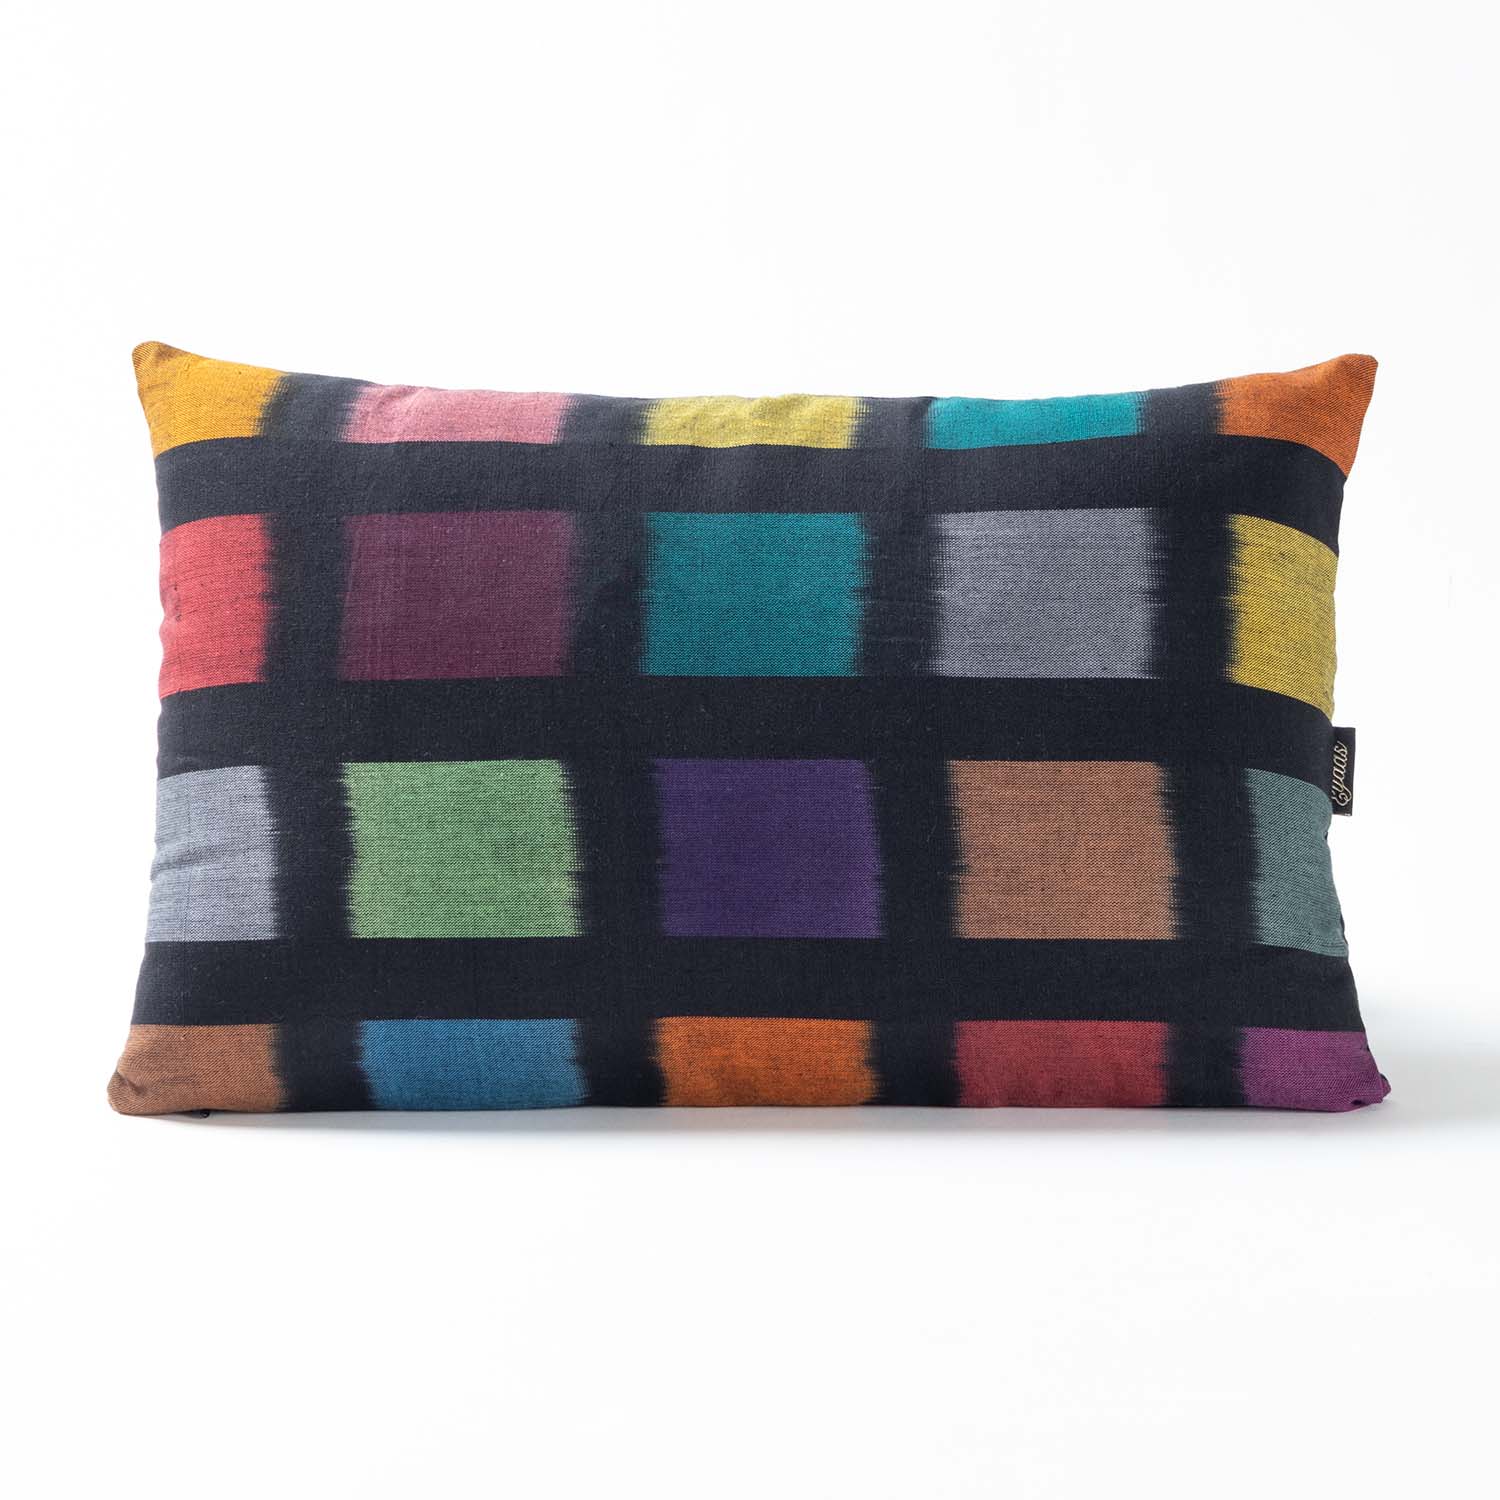 Handwoven Ikat Cushion Cover - 12x12